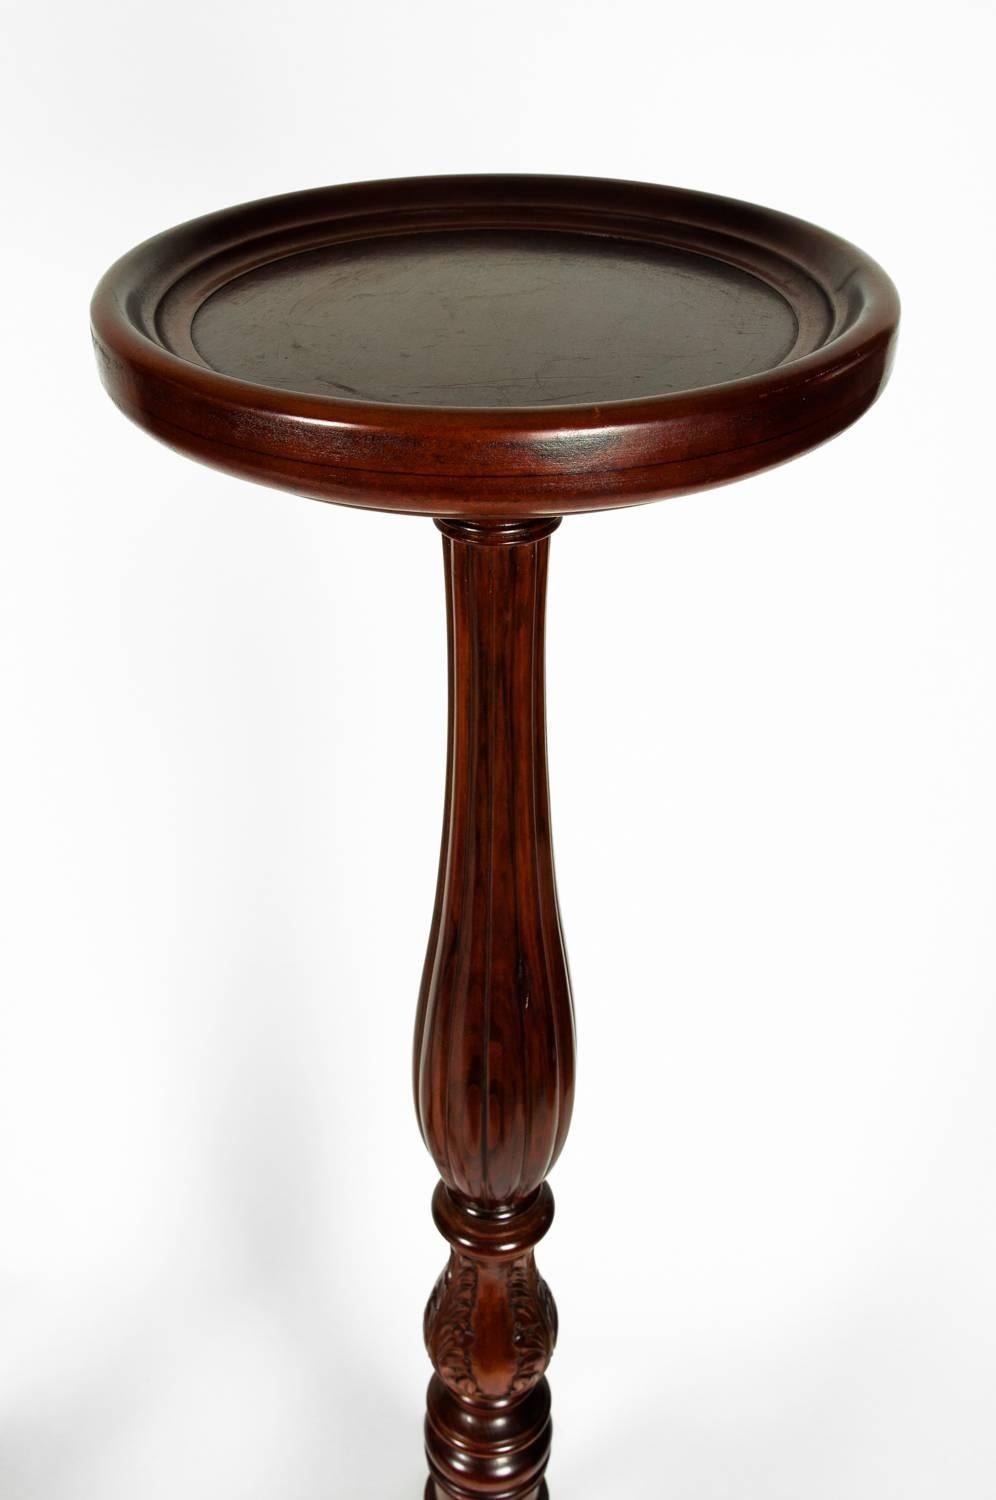 Pair of dark mahogany wood, mid-20th century plant stand / ferns / pedestals tables. Each fern / stand is in excellent condition. Each one measures about 51 inches high and 12 inches top diameter.
 